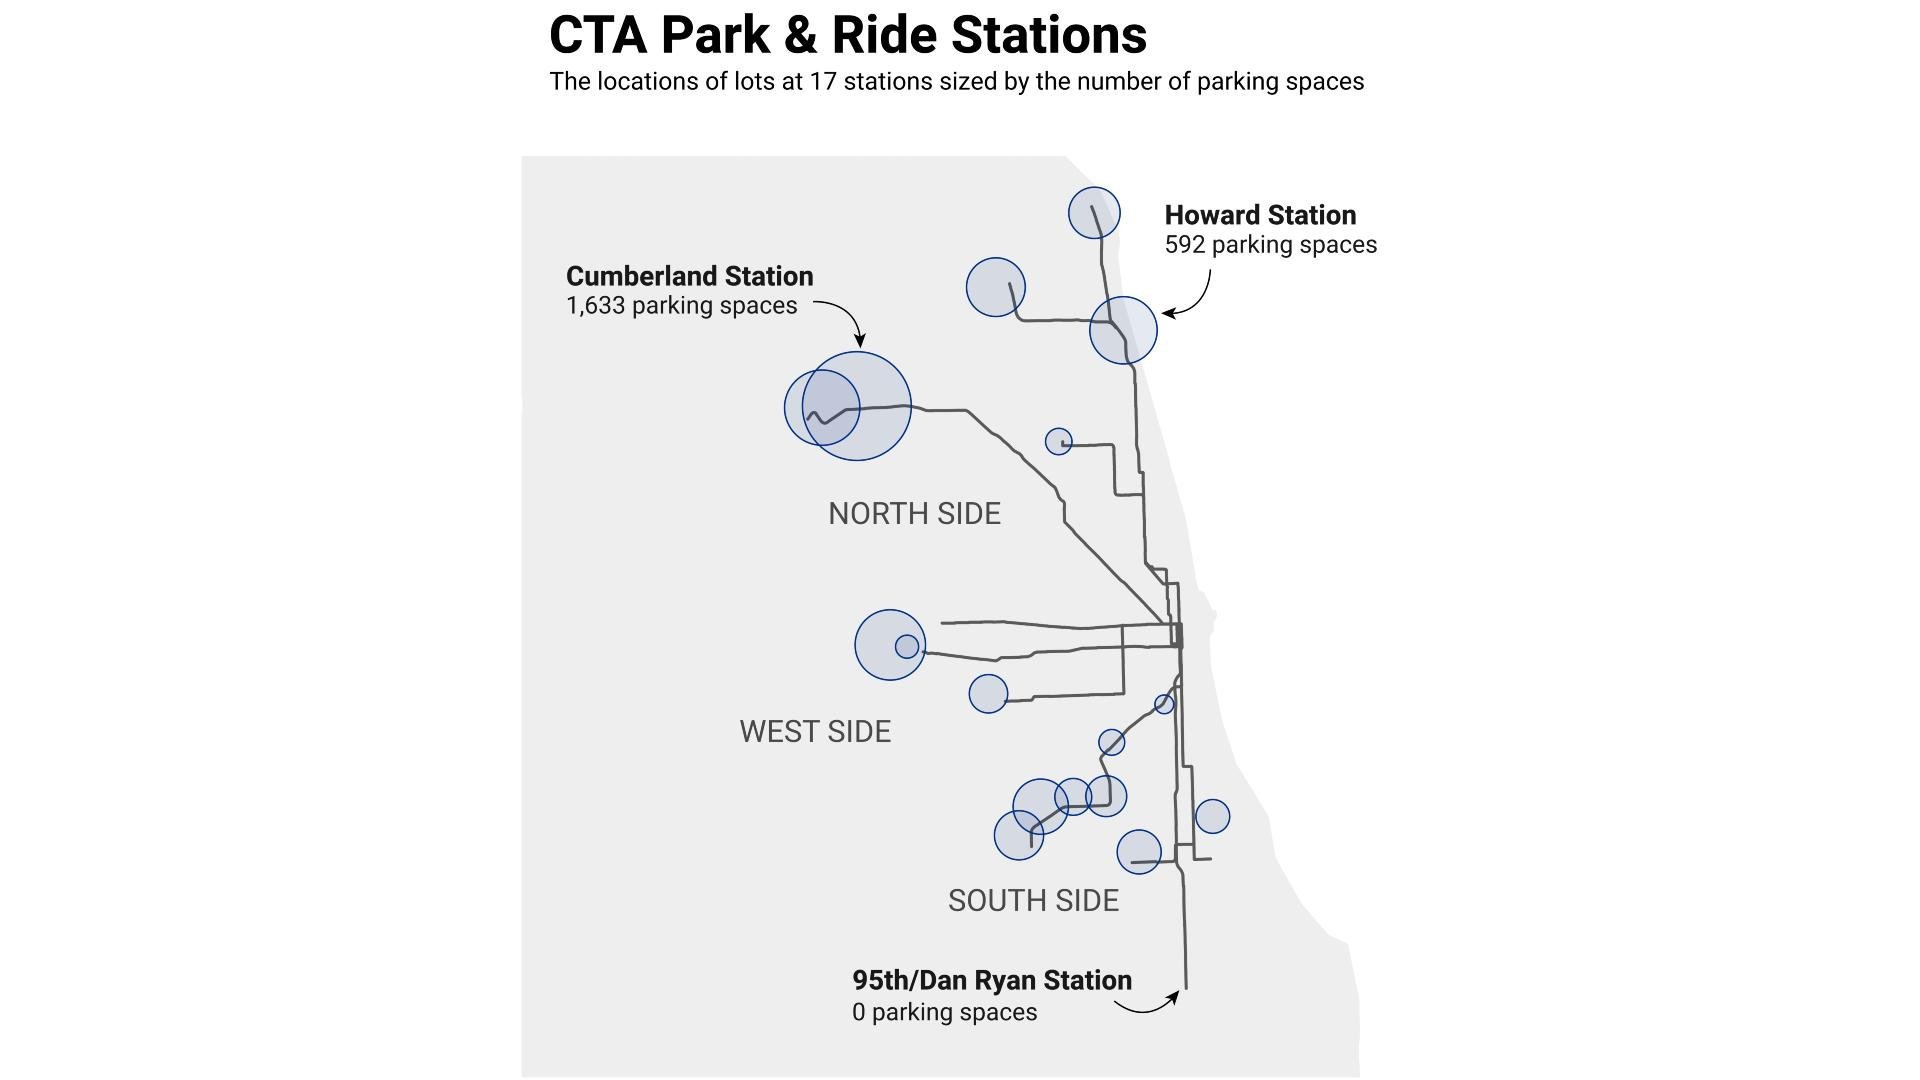 A map of Park & Ride locations in Chicago.